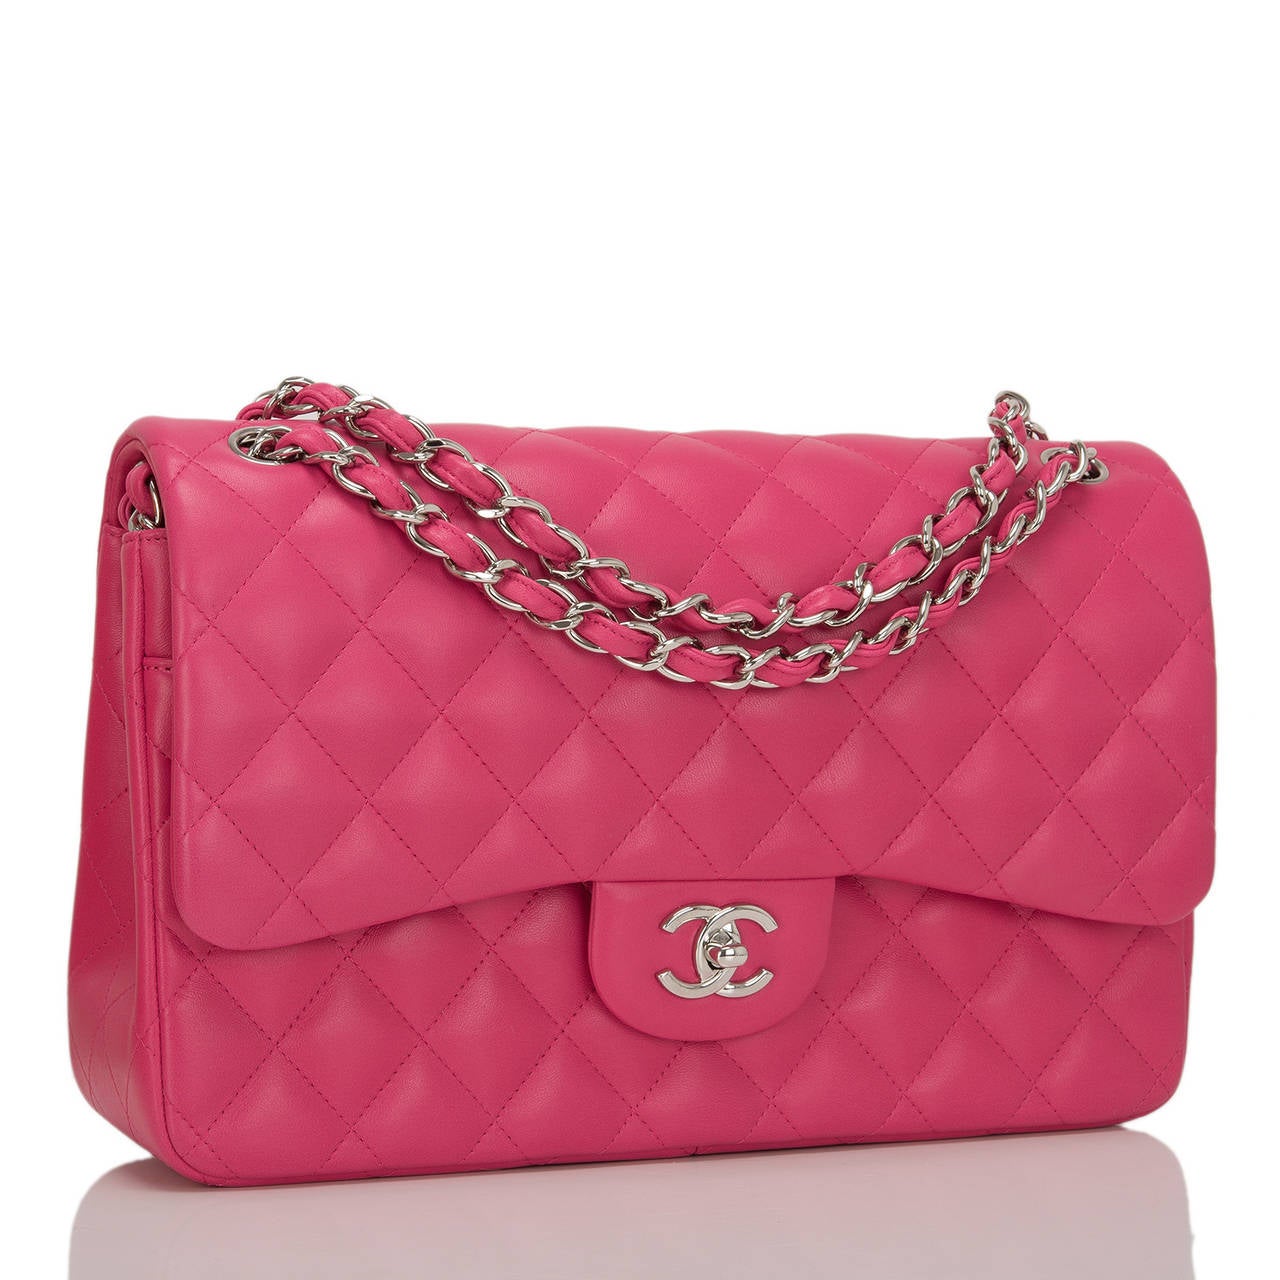 This Chanel Jumbo Classic double flap of limited edition fuchsia pink lambskin leather with silver tone hardware features a front flap with signature CC turnlock closure, half moon back pocket, and an adjustable interwoven silver tone chain link and